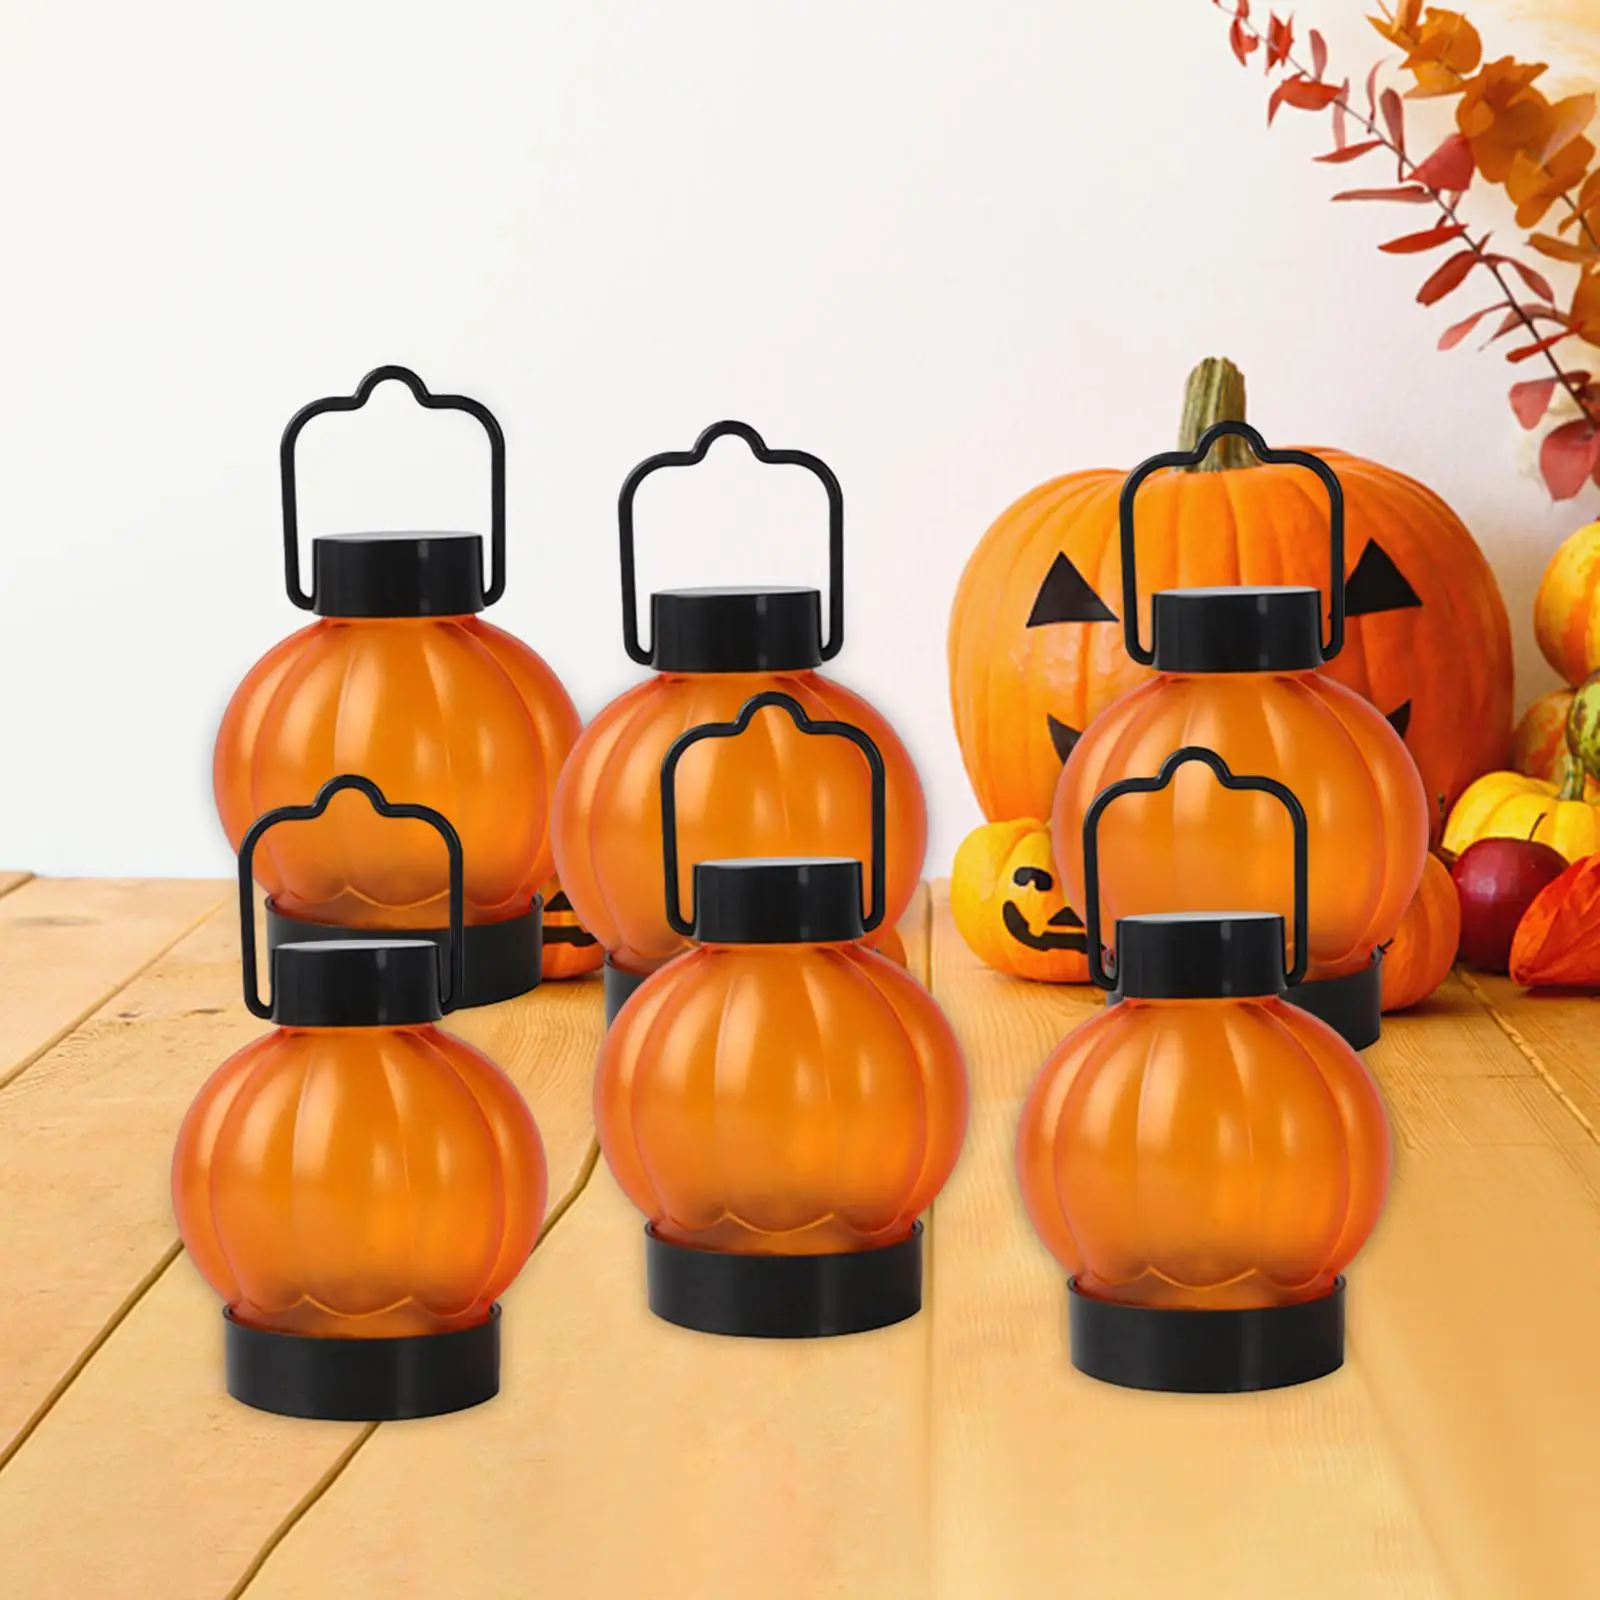 6Pcs Halloween Pumpkin Lights Photo Props Desk Lamp Decoration Candle Lanterns for Party Dining Room NightStand Event